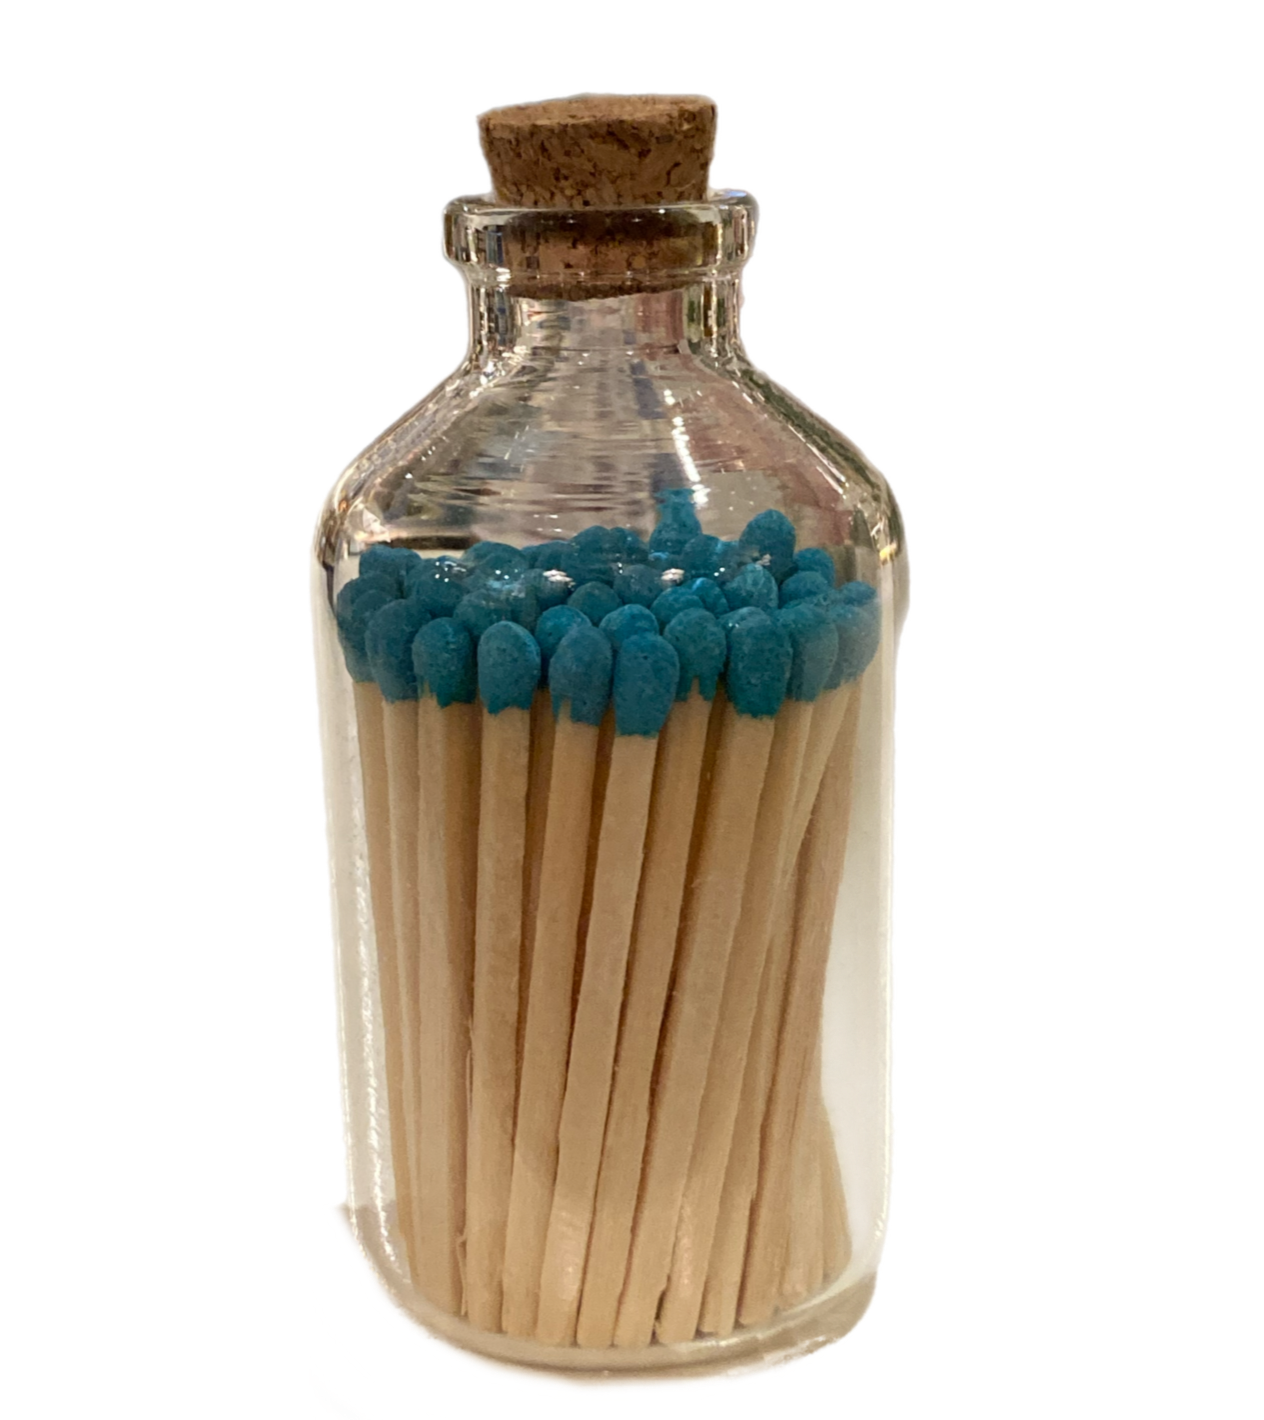 Turquoise Coloured Matches In Jar